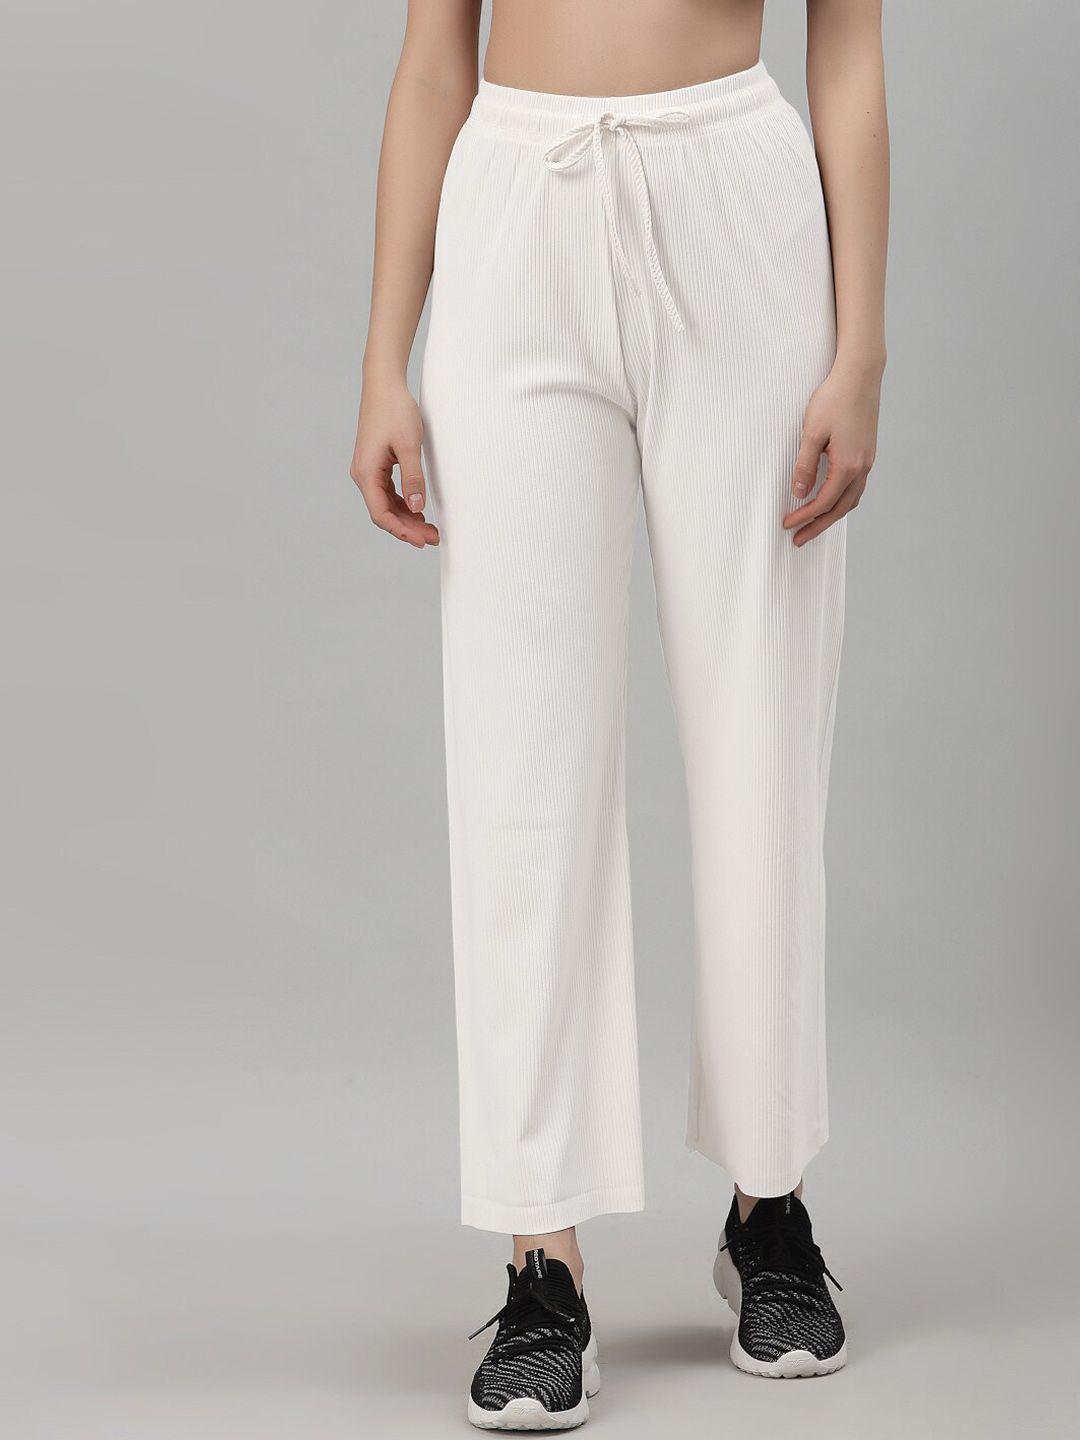 neudis-women-relaxed-straight-leg-straight-fit-trousers